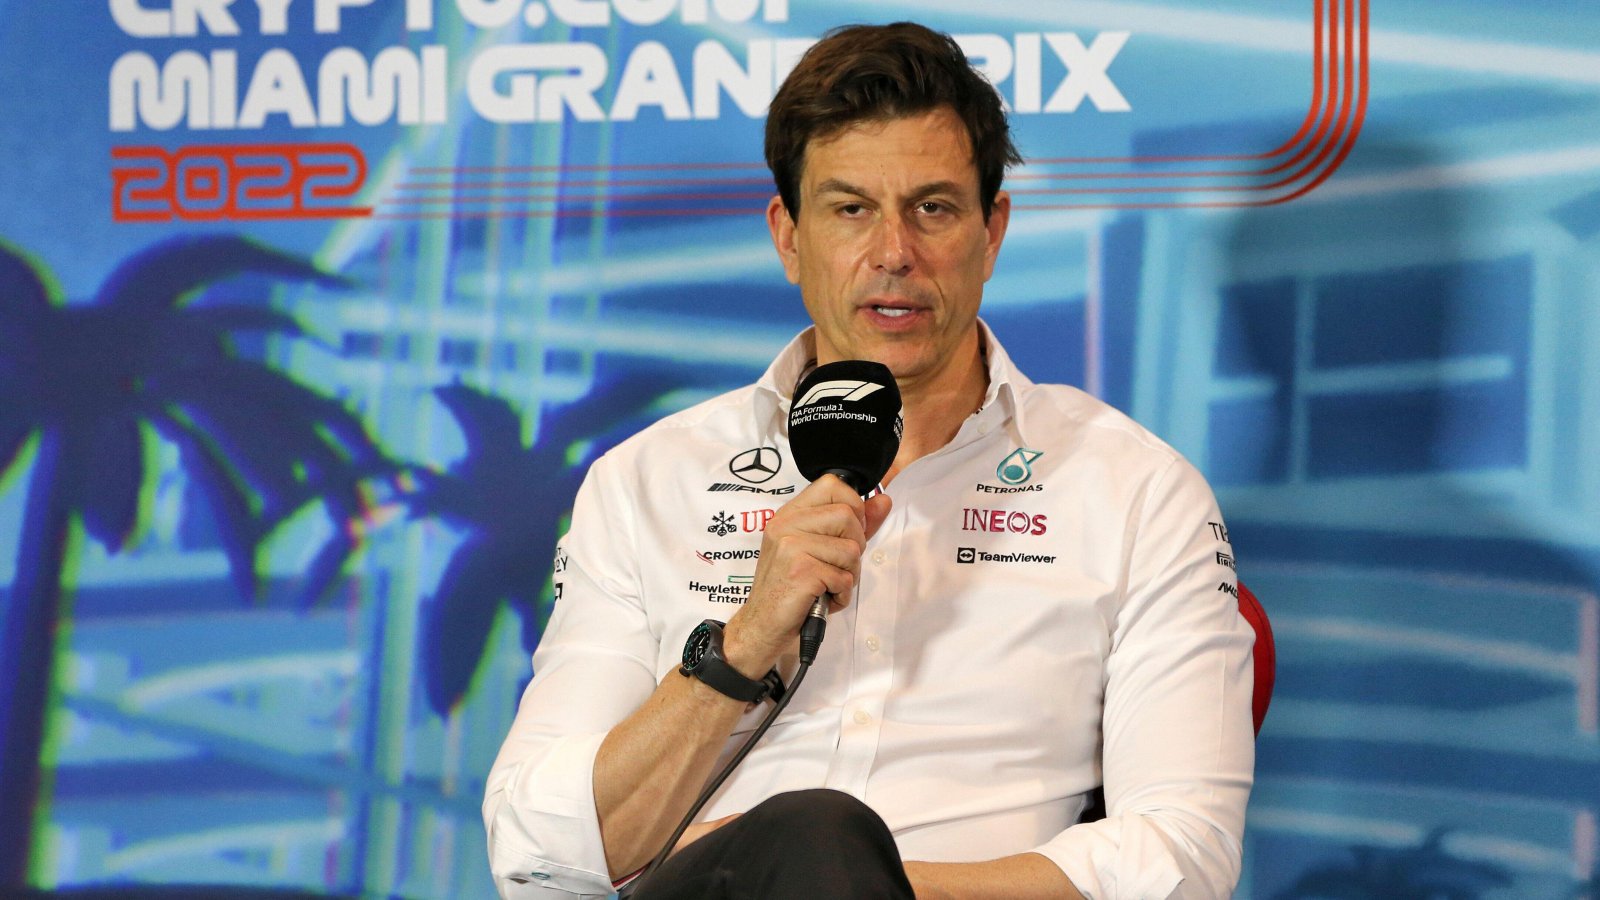 Toto Wolff answering a question. Miami, May 2022.